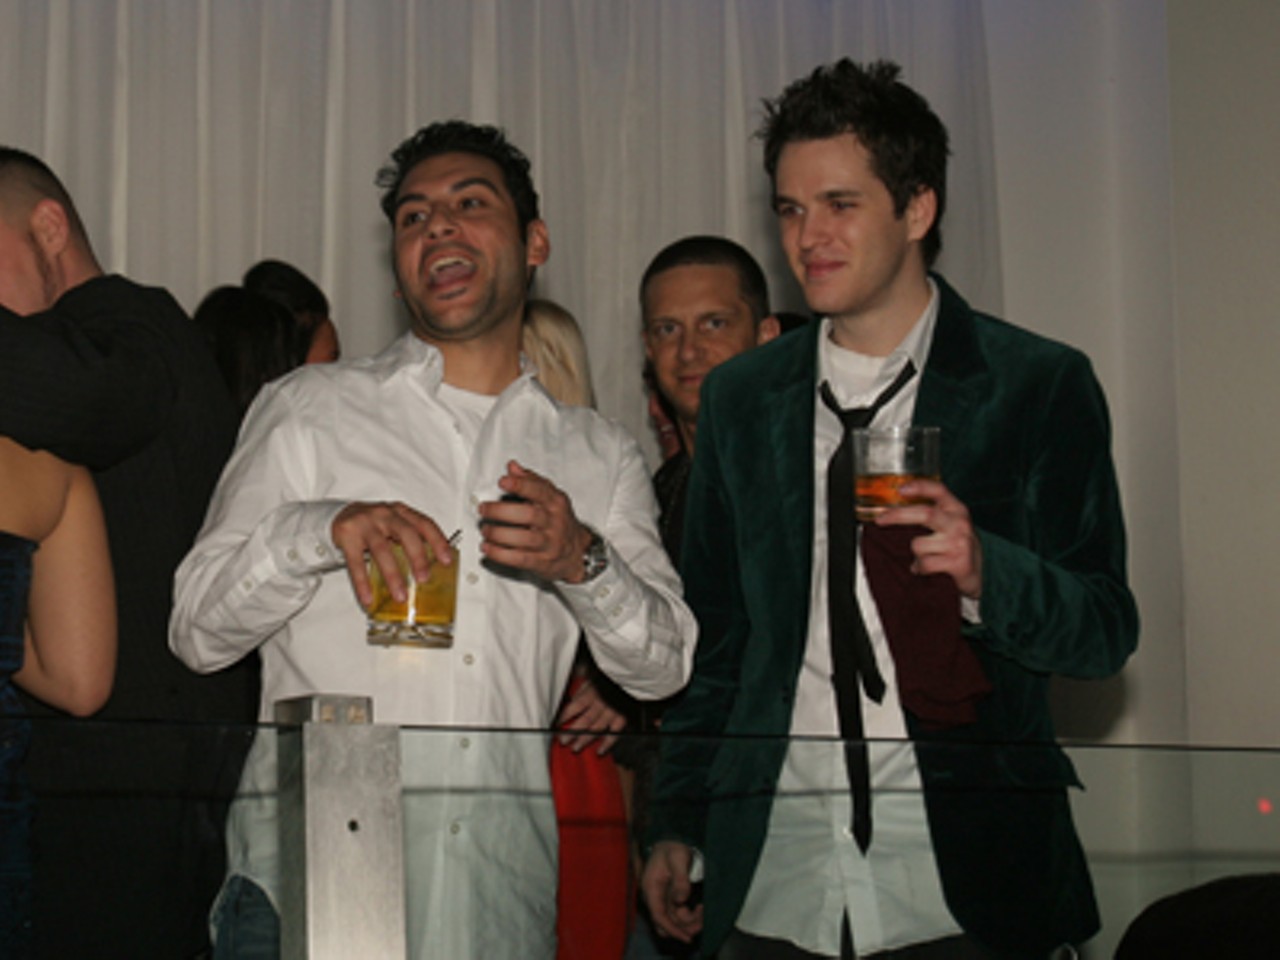 TheDirty.com founder Nik Ritchie, on the left.